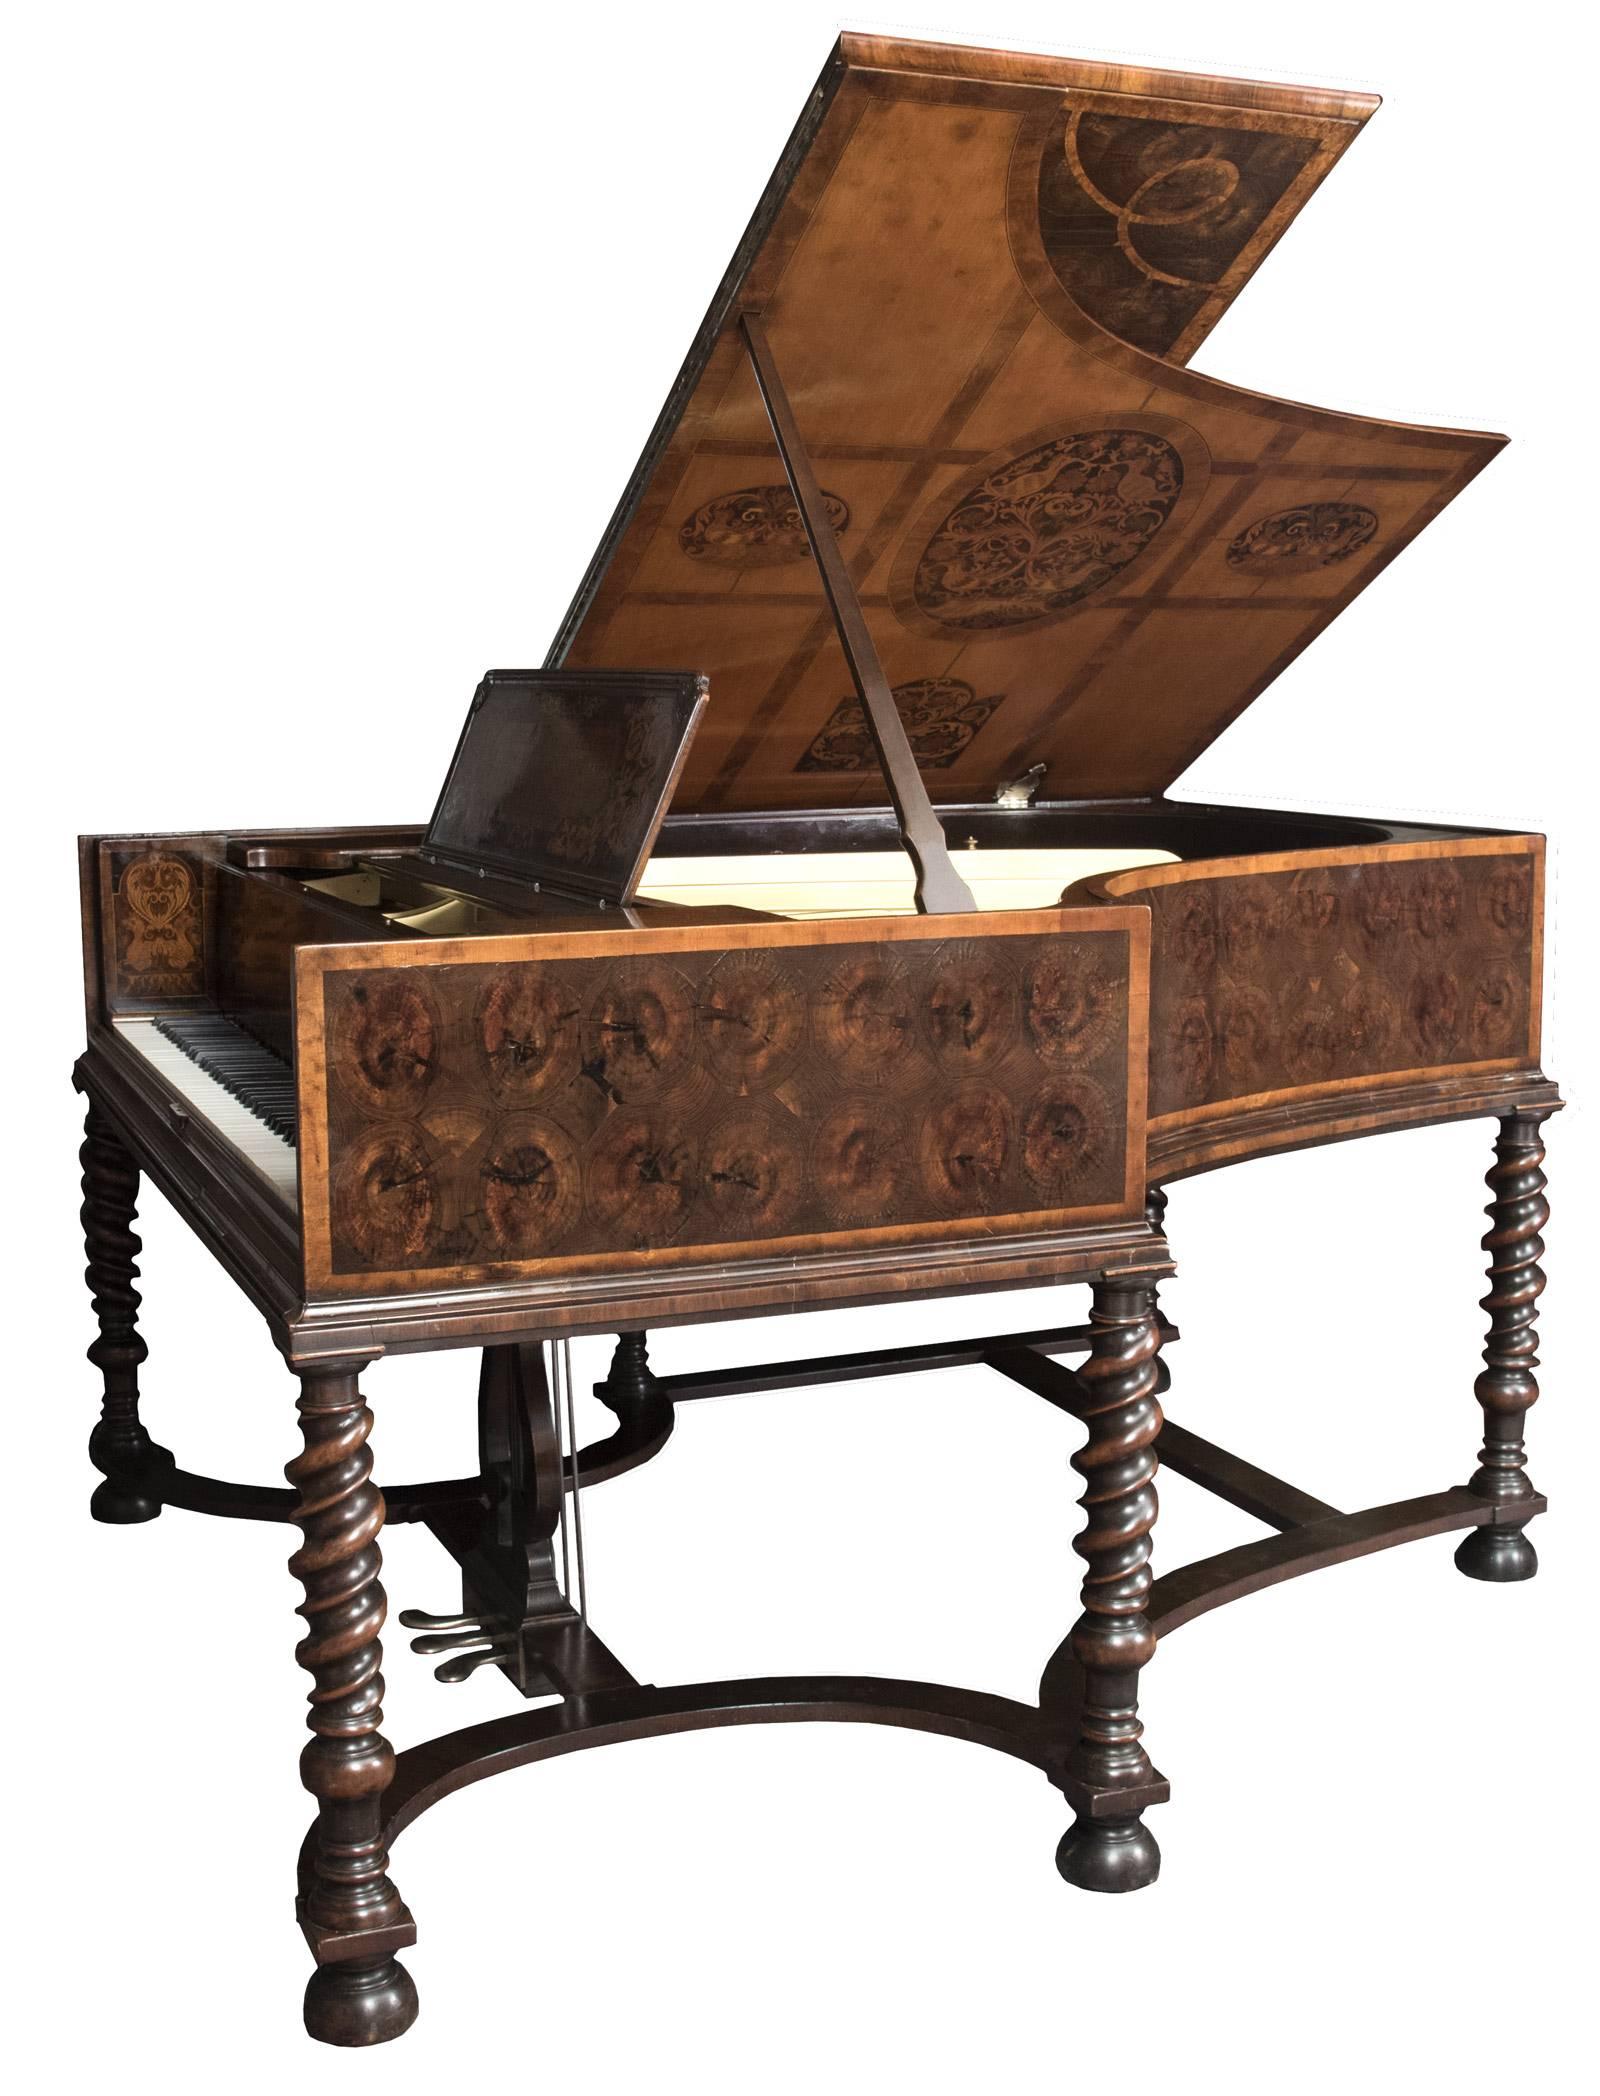 An extraordinary 19th century Steinway concert grand piano with a case that is entirely decorated with butt cut veneer and ornate inlay marquetry designs on all sides, including the lid and fall board, and raised on six carved twisting legs, the